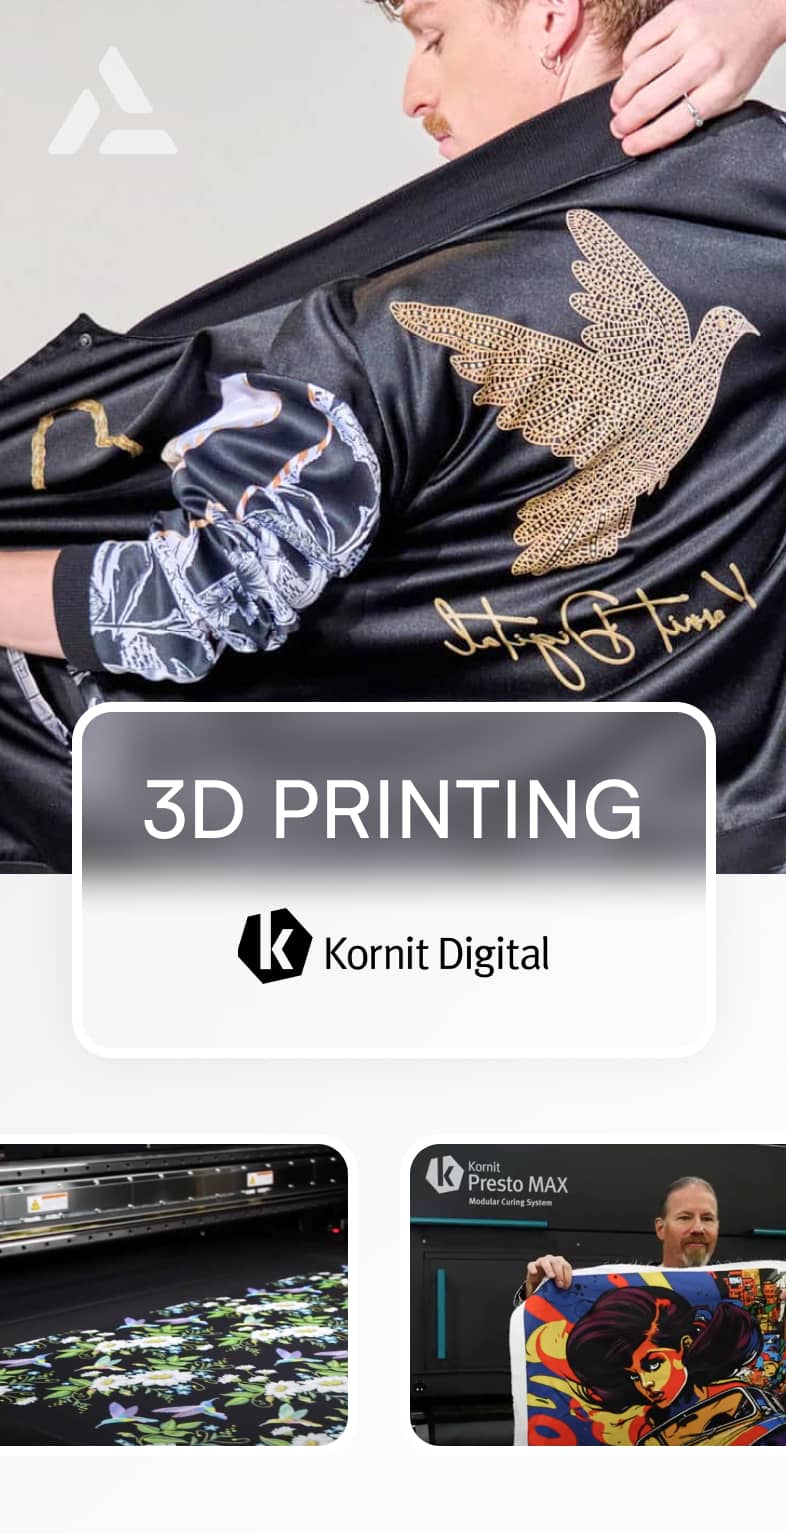 Man wearing a black shirt with a 3D-printed design, showcasing the capabilities of Kornit Digital's 3D printing technology in the on-demand fashion industry.